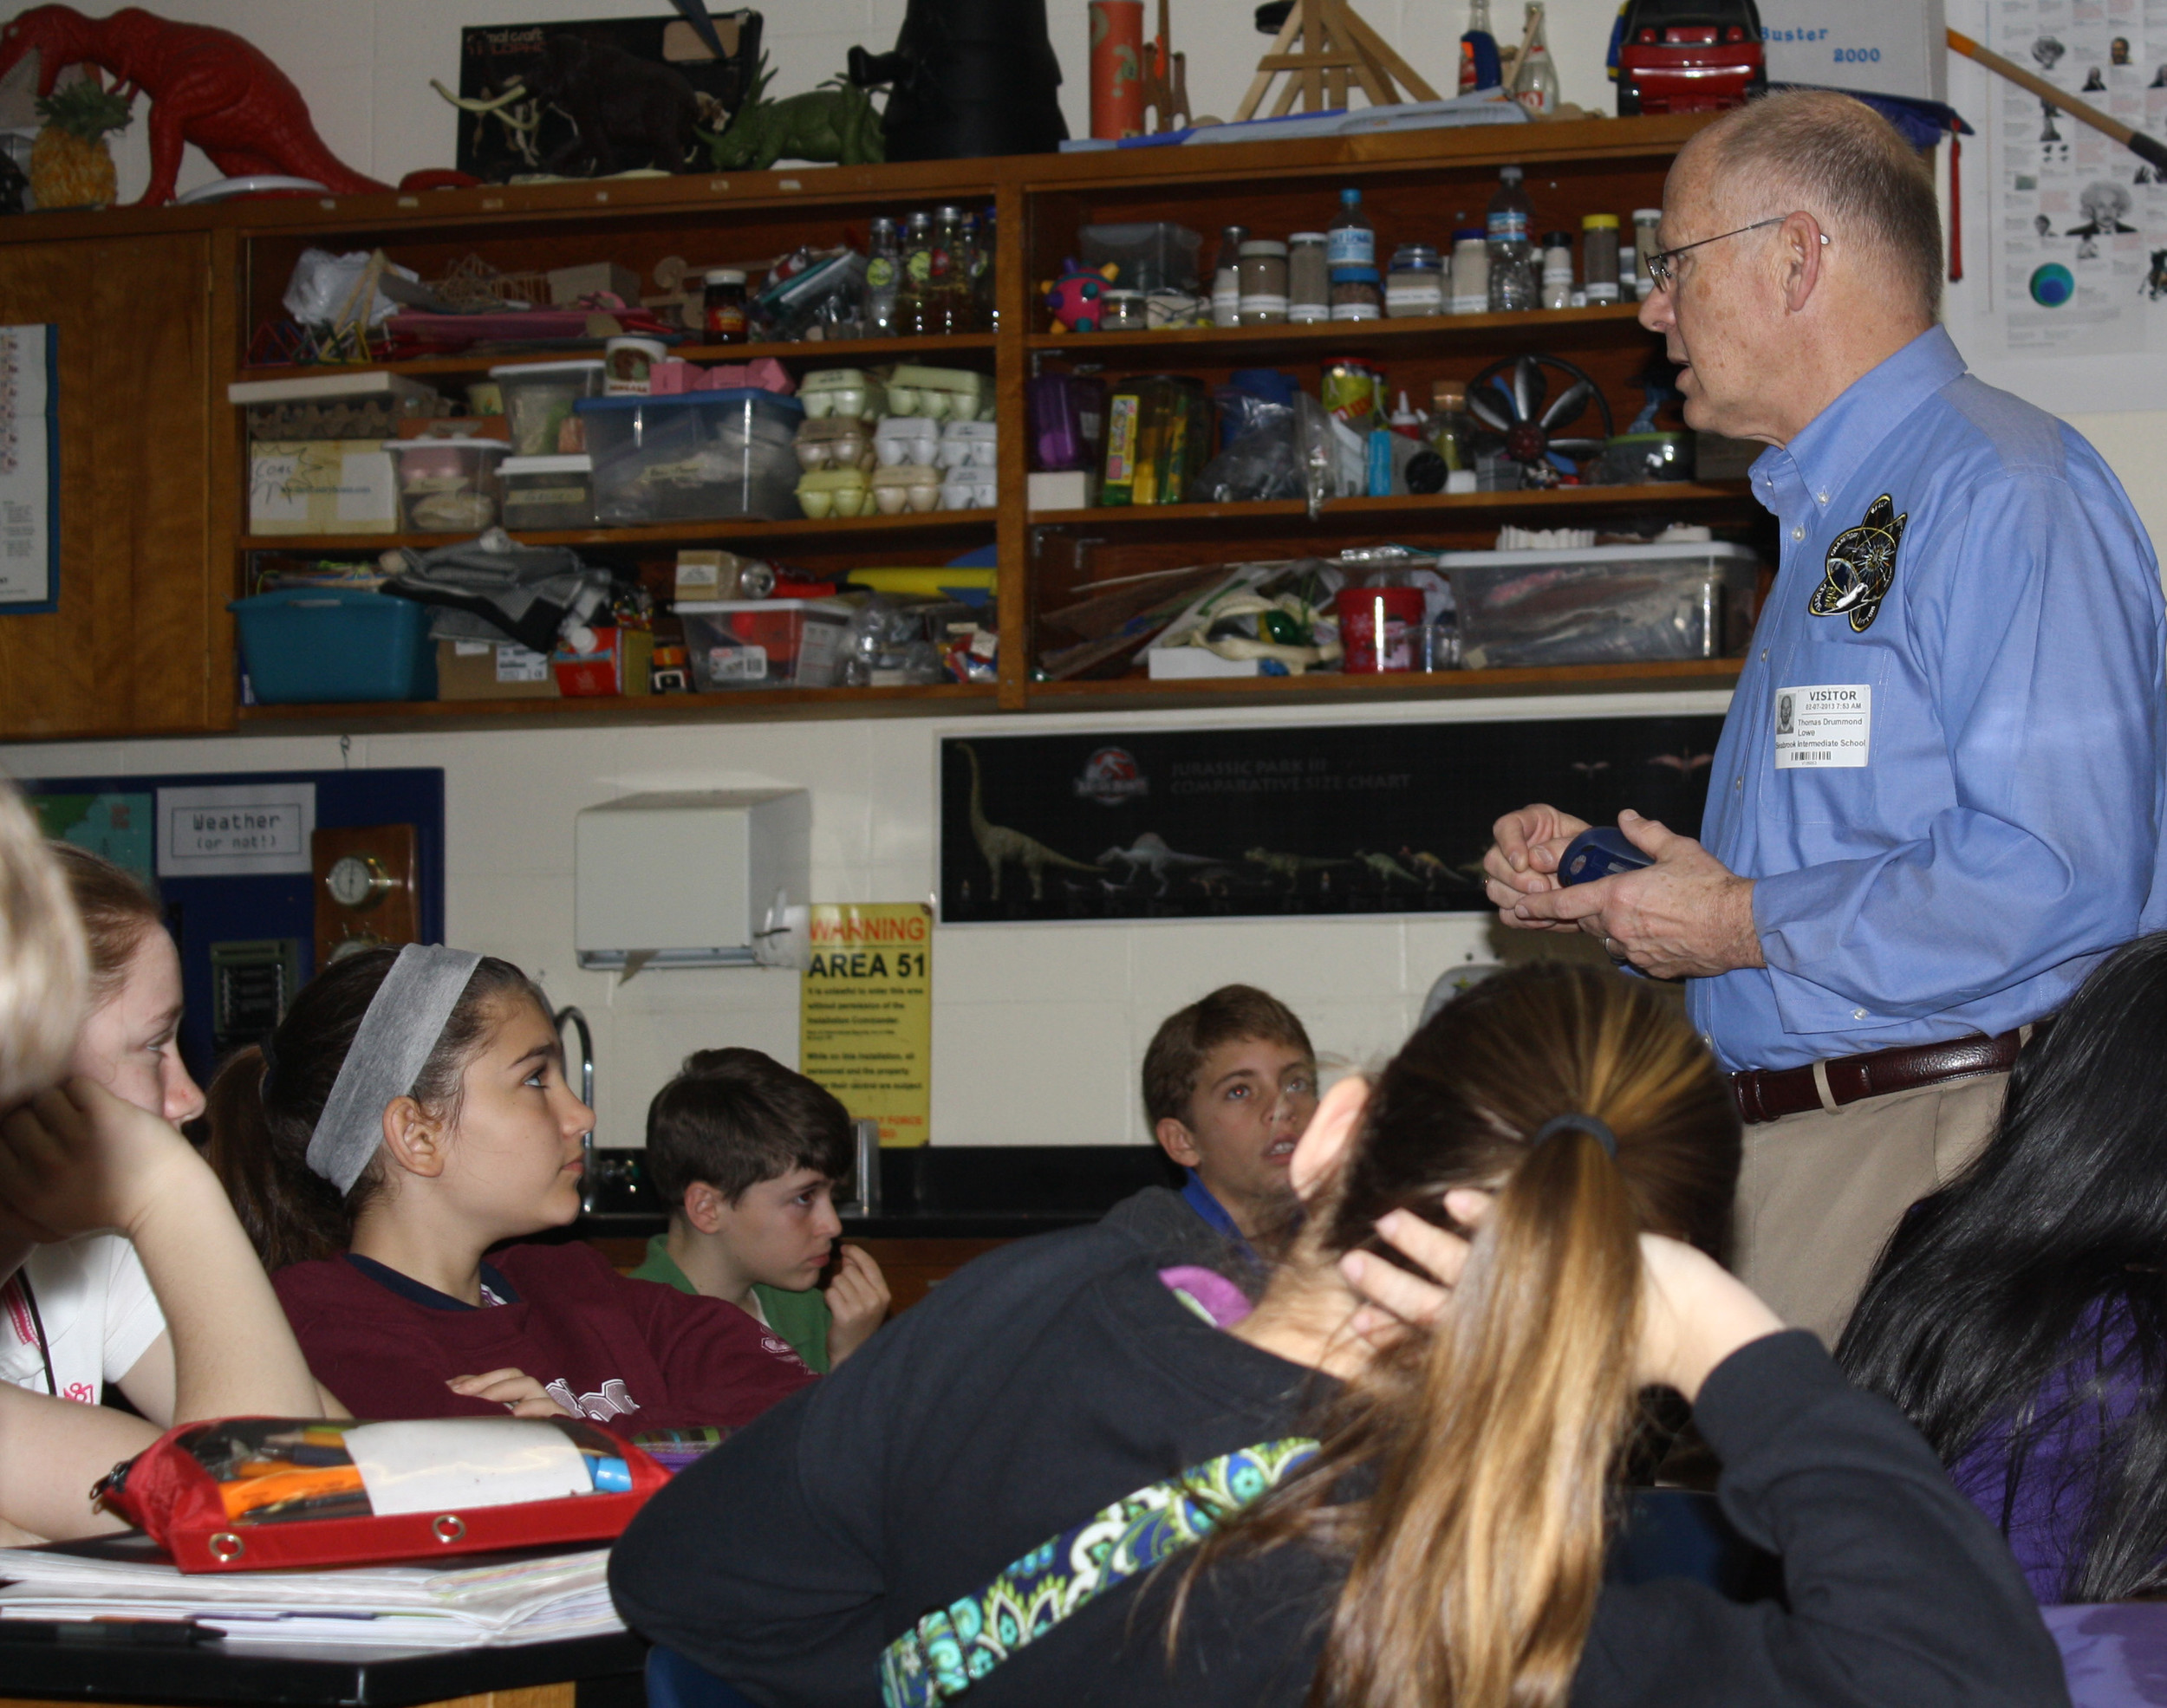 Orion’s Quest Program Director Tom Drummond addresses a group of students at Seabrook Intermediate School in Texas.